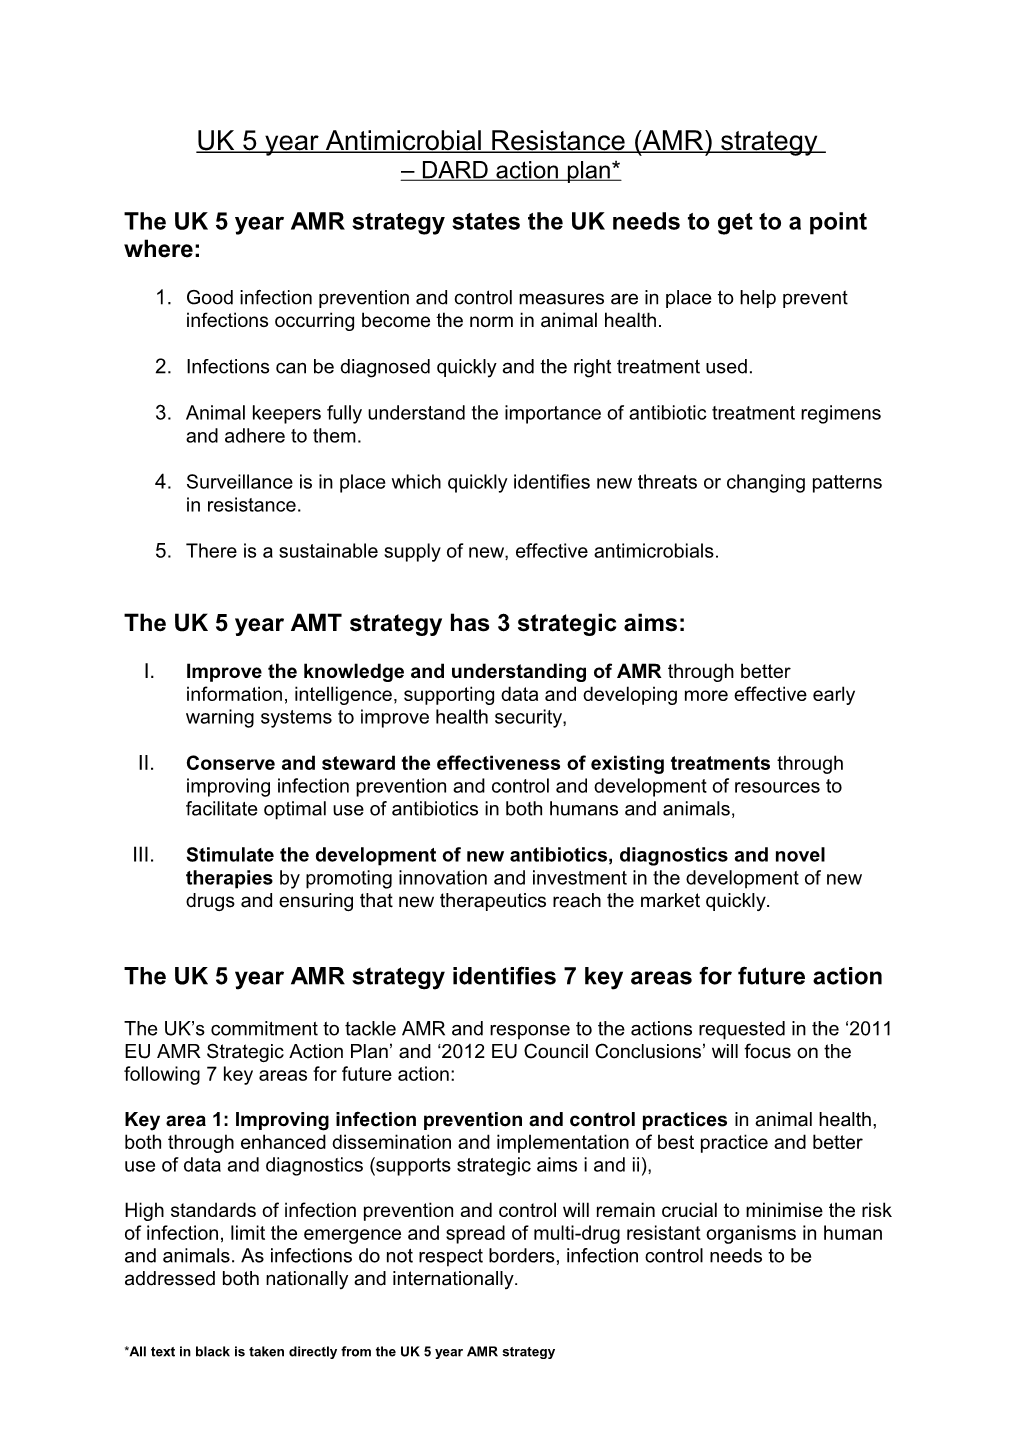 UK 5 Year Antimicrobial Resistance (AMR) Strategy